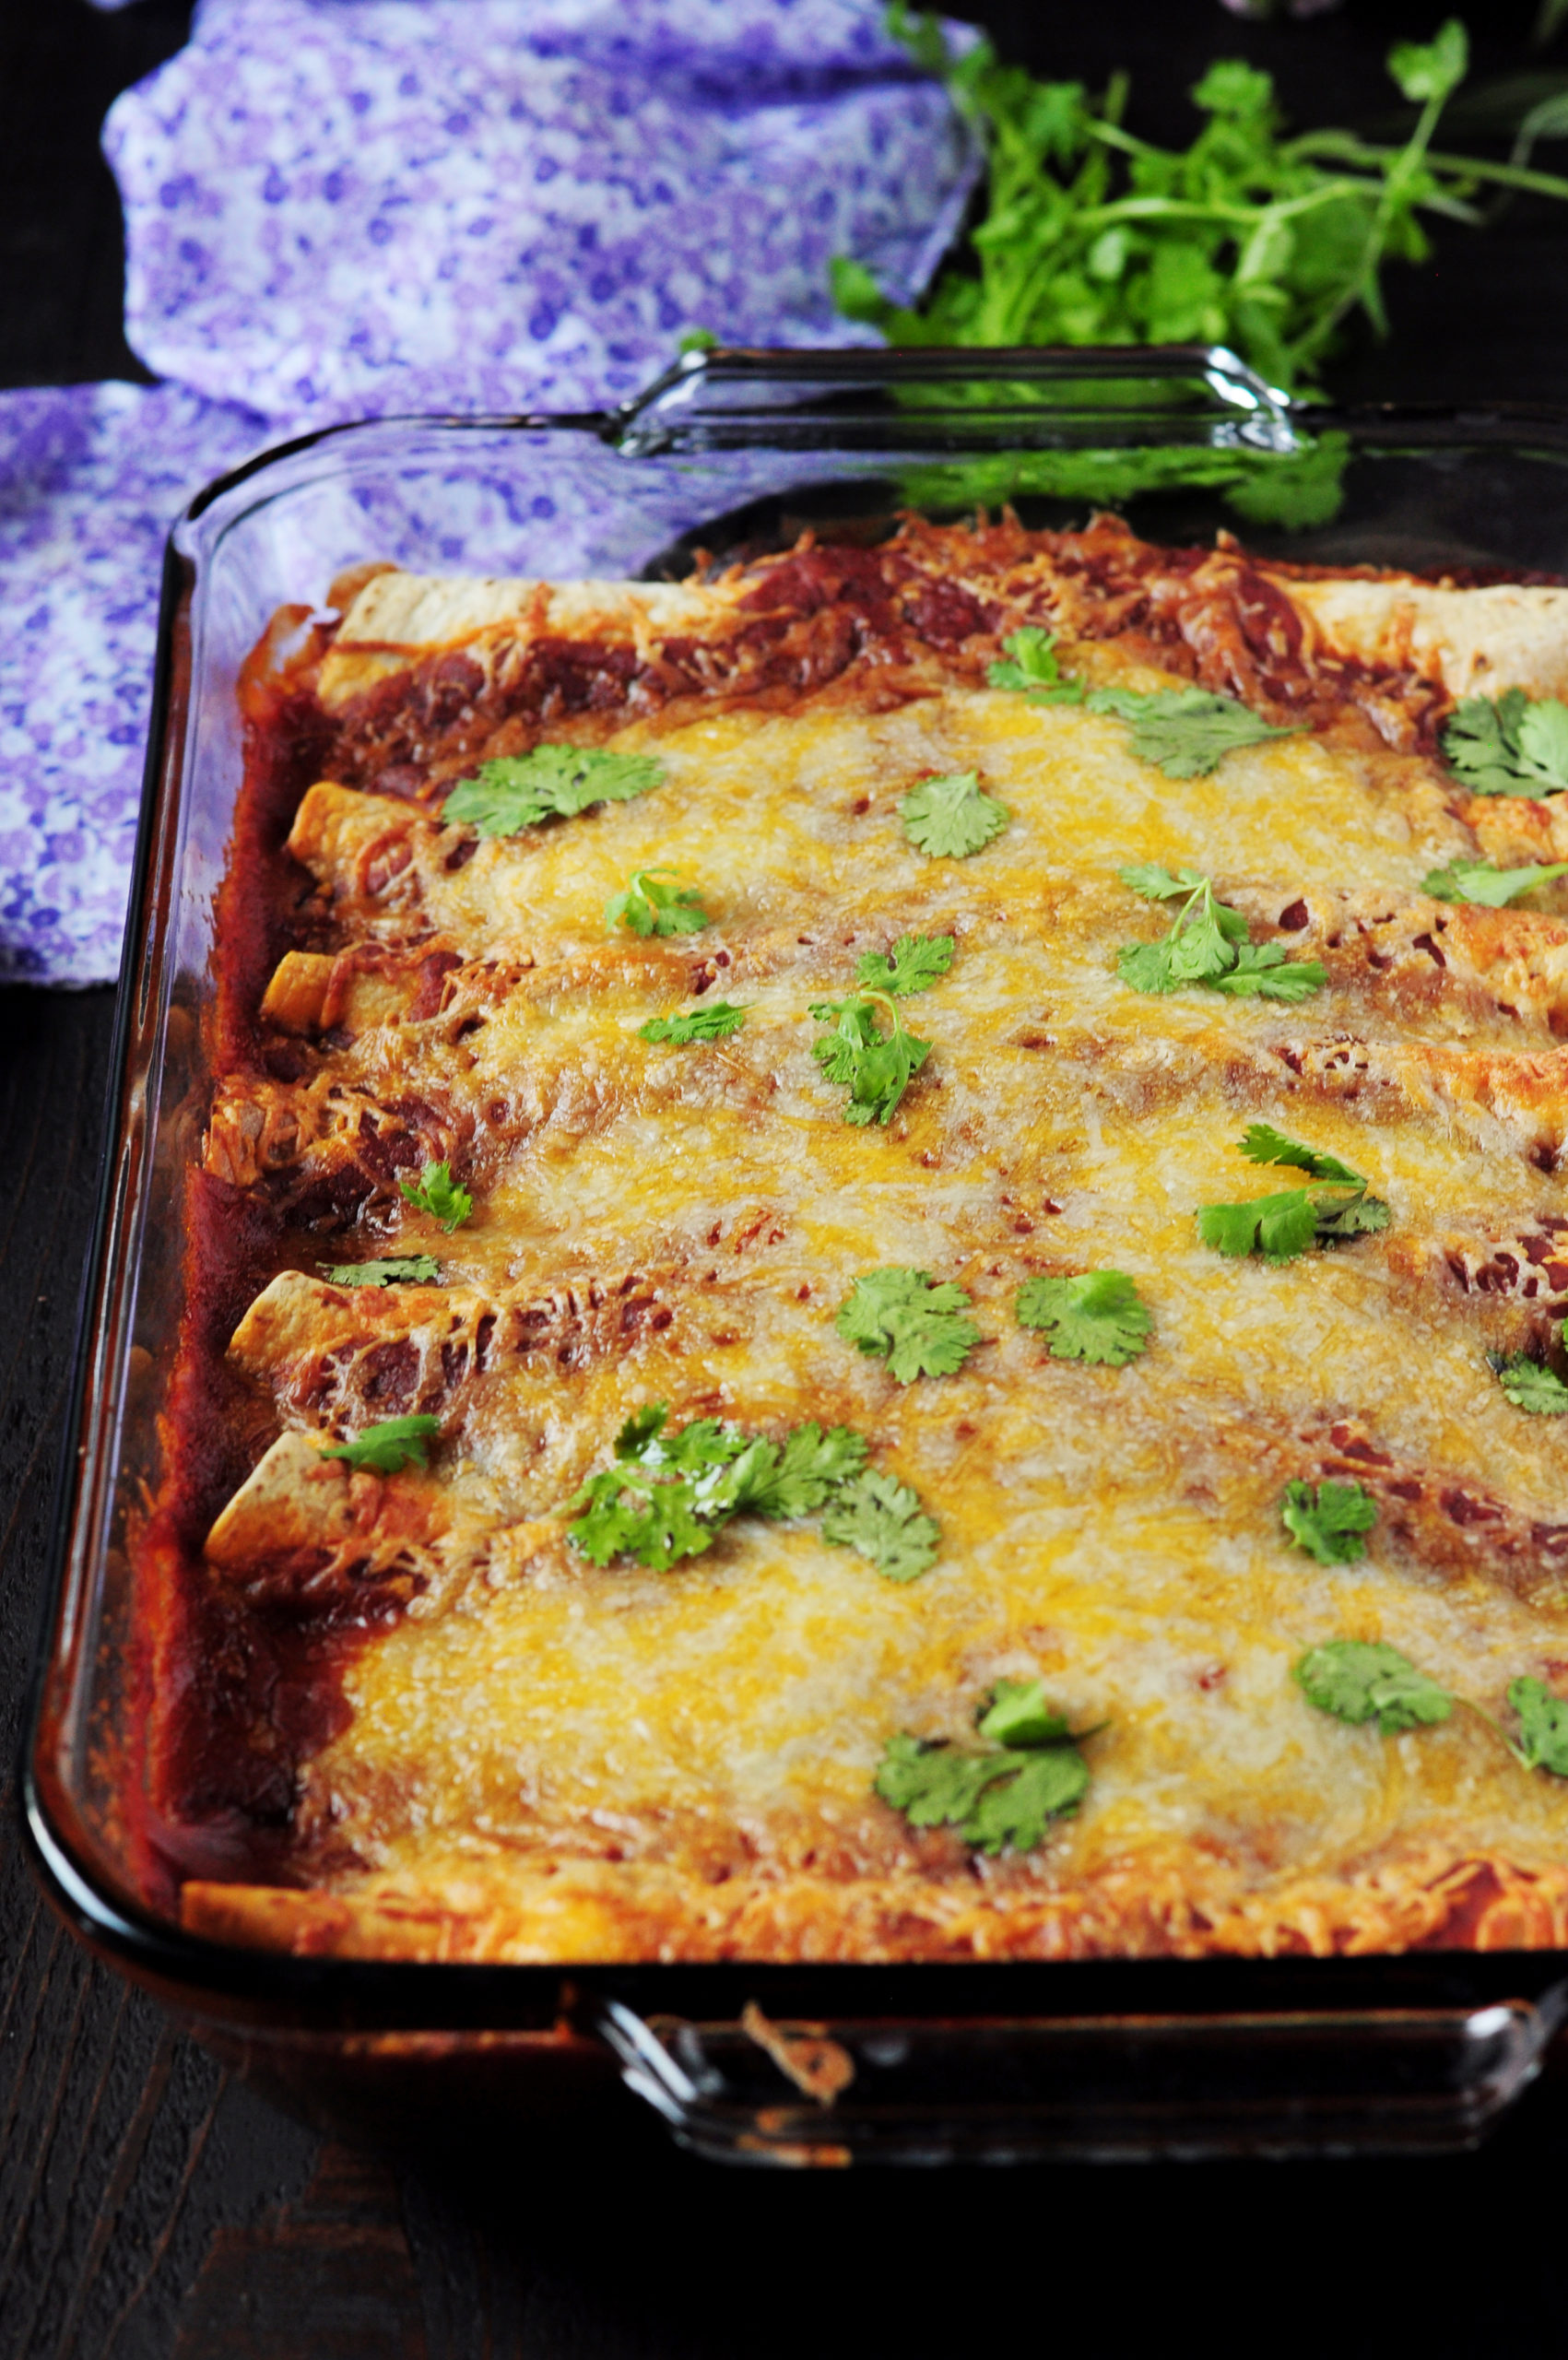 Mexican-style cooking is simplified with these ground turkey enchiladas in an authentic red sauce. 15 minutes of prep and 8 easy steps to bold, delicious flavors.